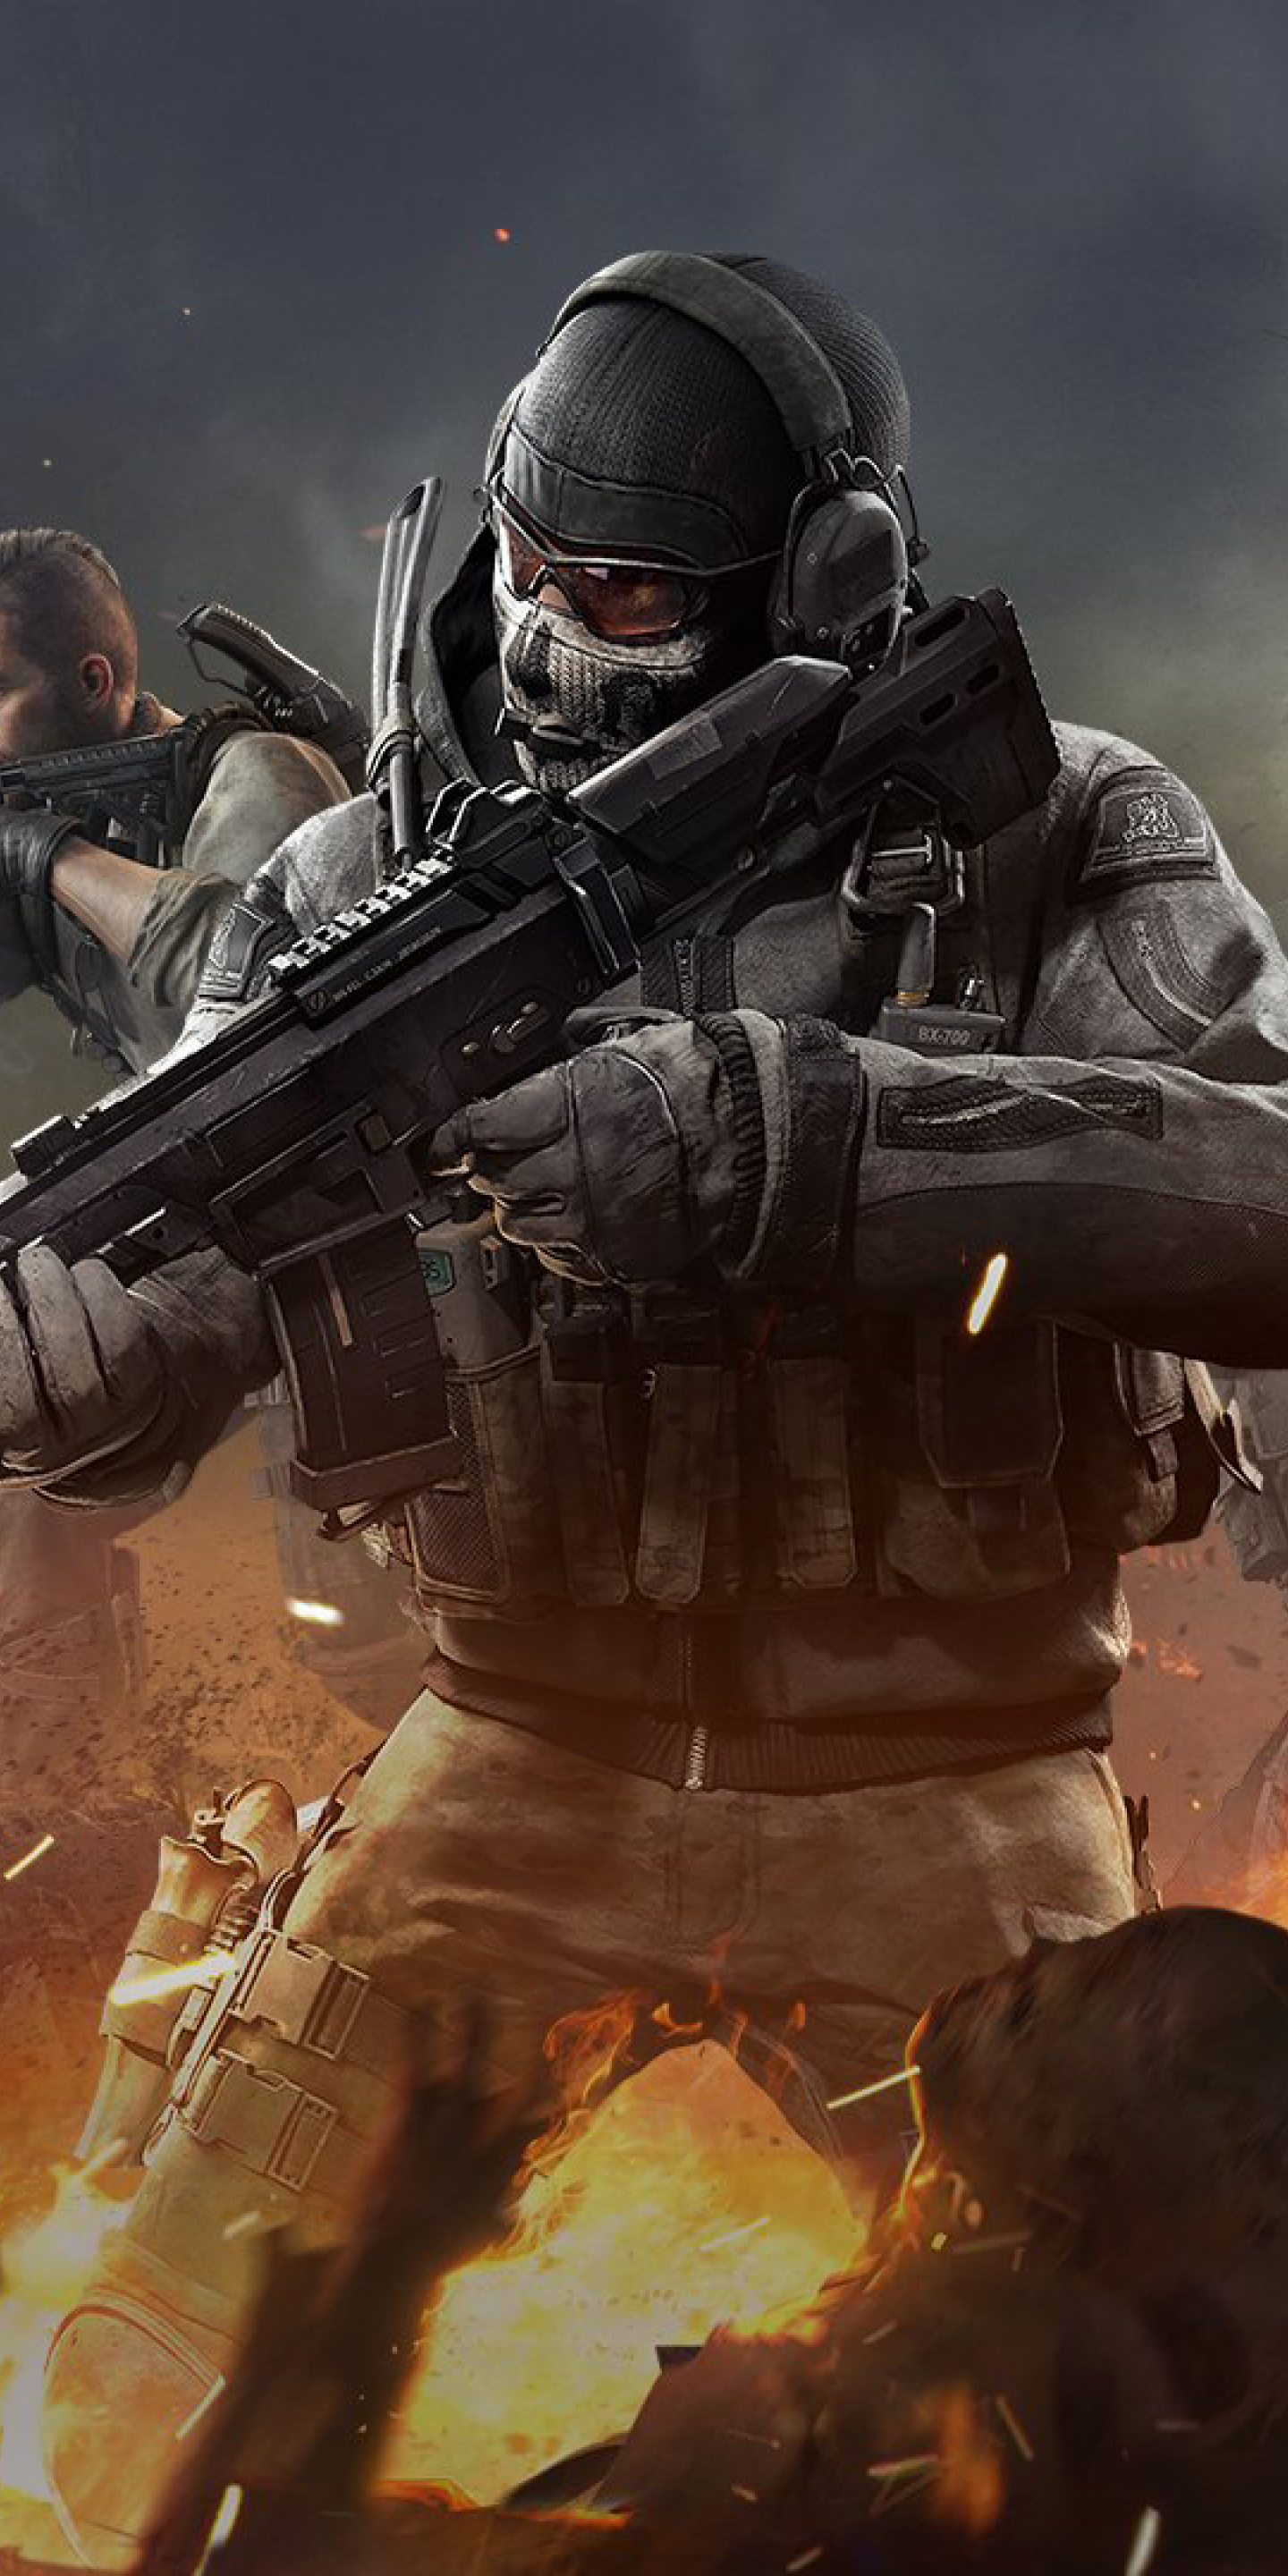 mace metal phantom call of duty mobile wallpaper, hd games on call of duty thumbnails wallpapers